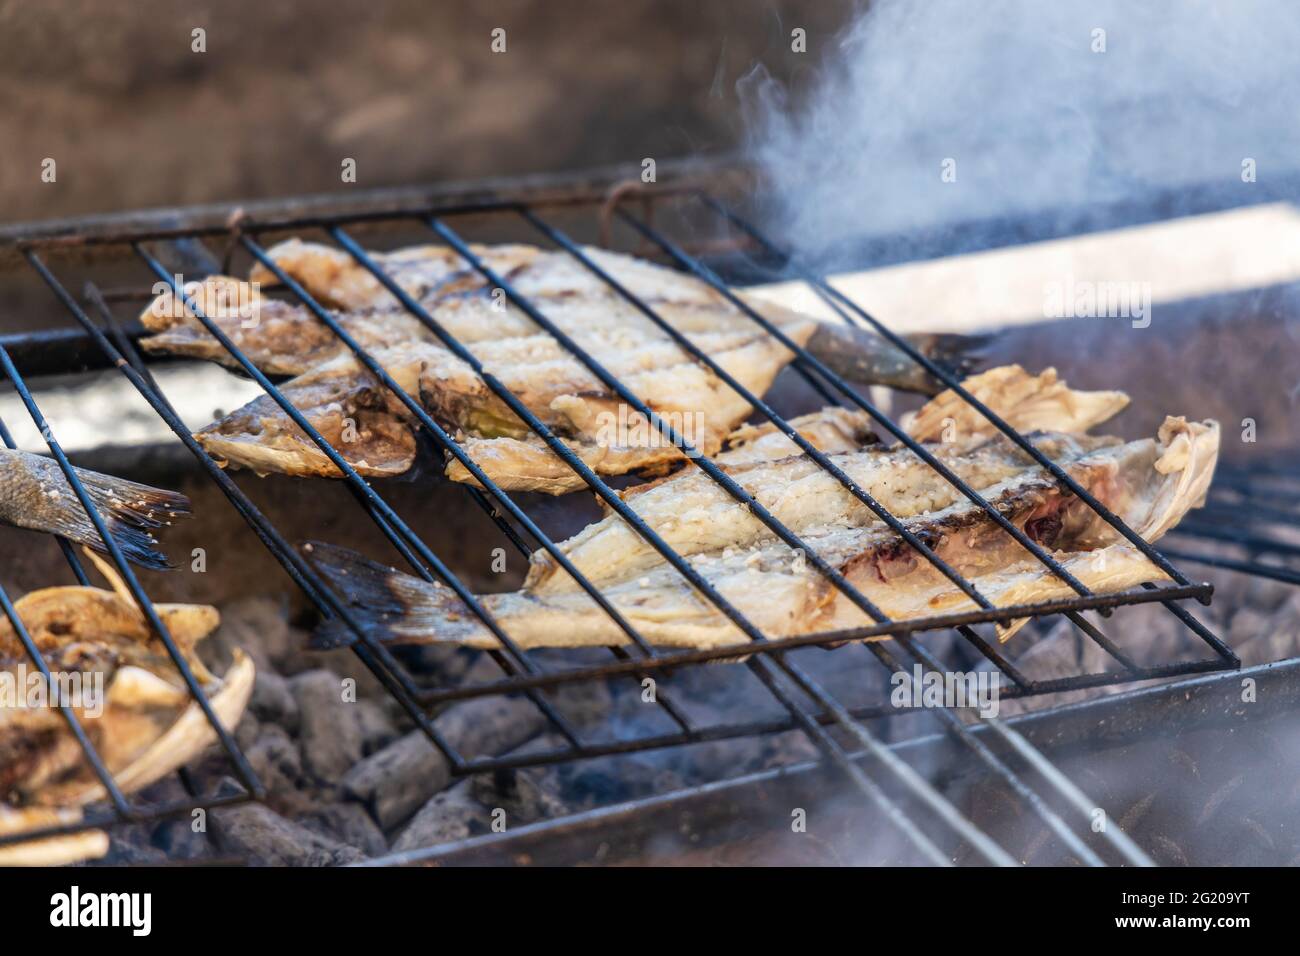 Delicious sea bass and golden fish barbecued on the charcoal in Portugal Stock Photo